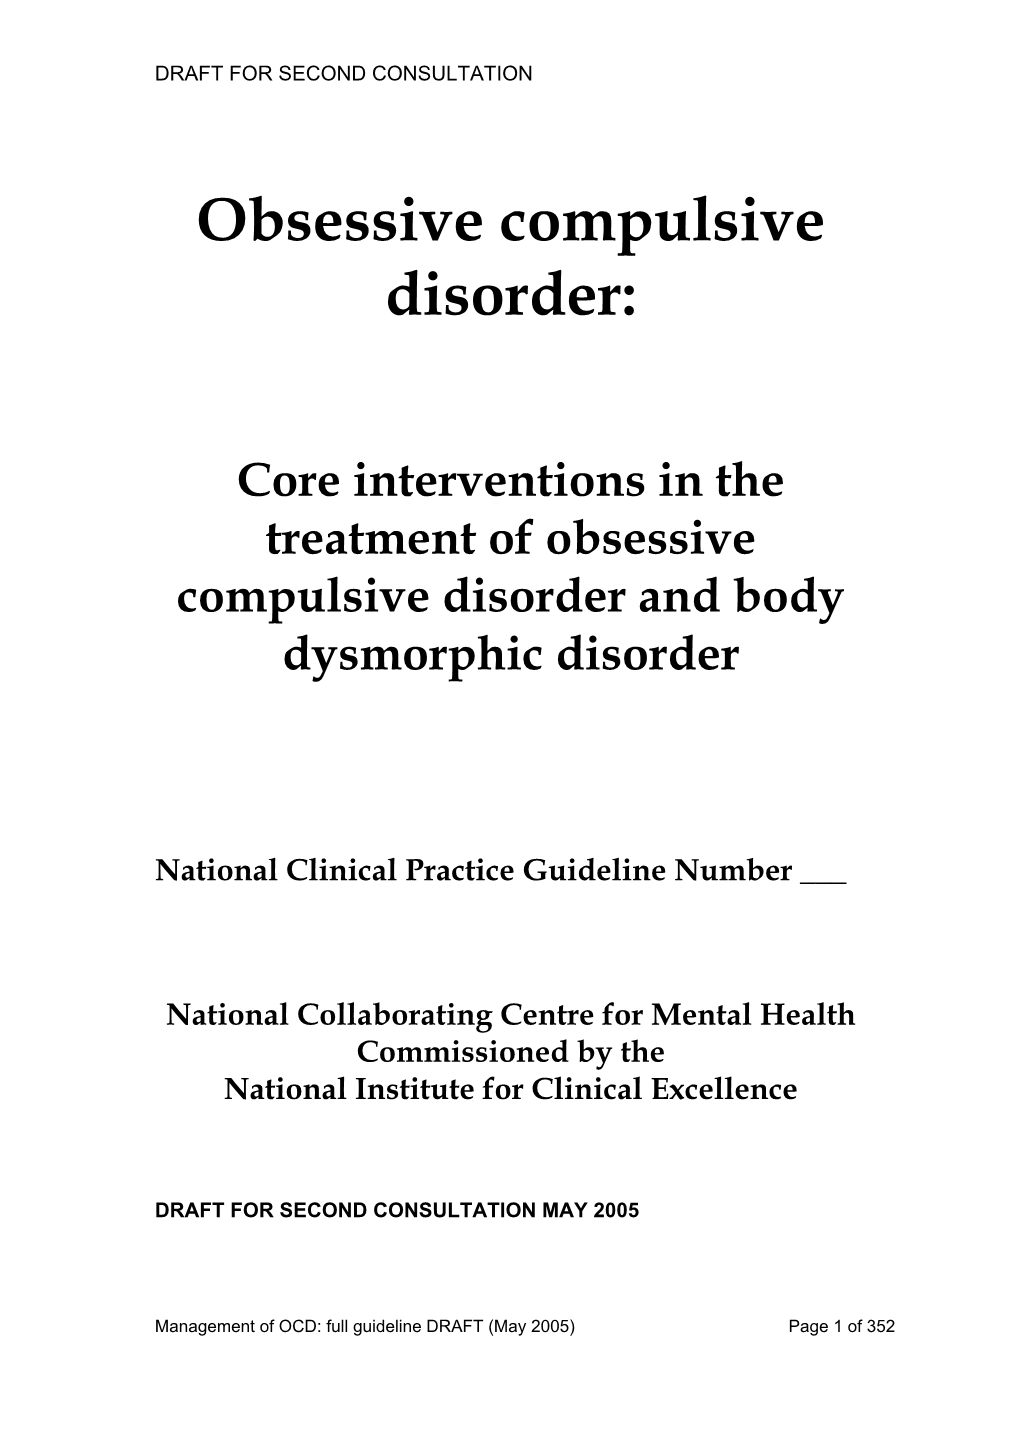 Core Interventions in the Treatment of Obsessive Compulsive Disorder and Body Dysmorphic Disorder